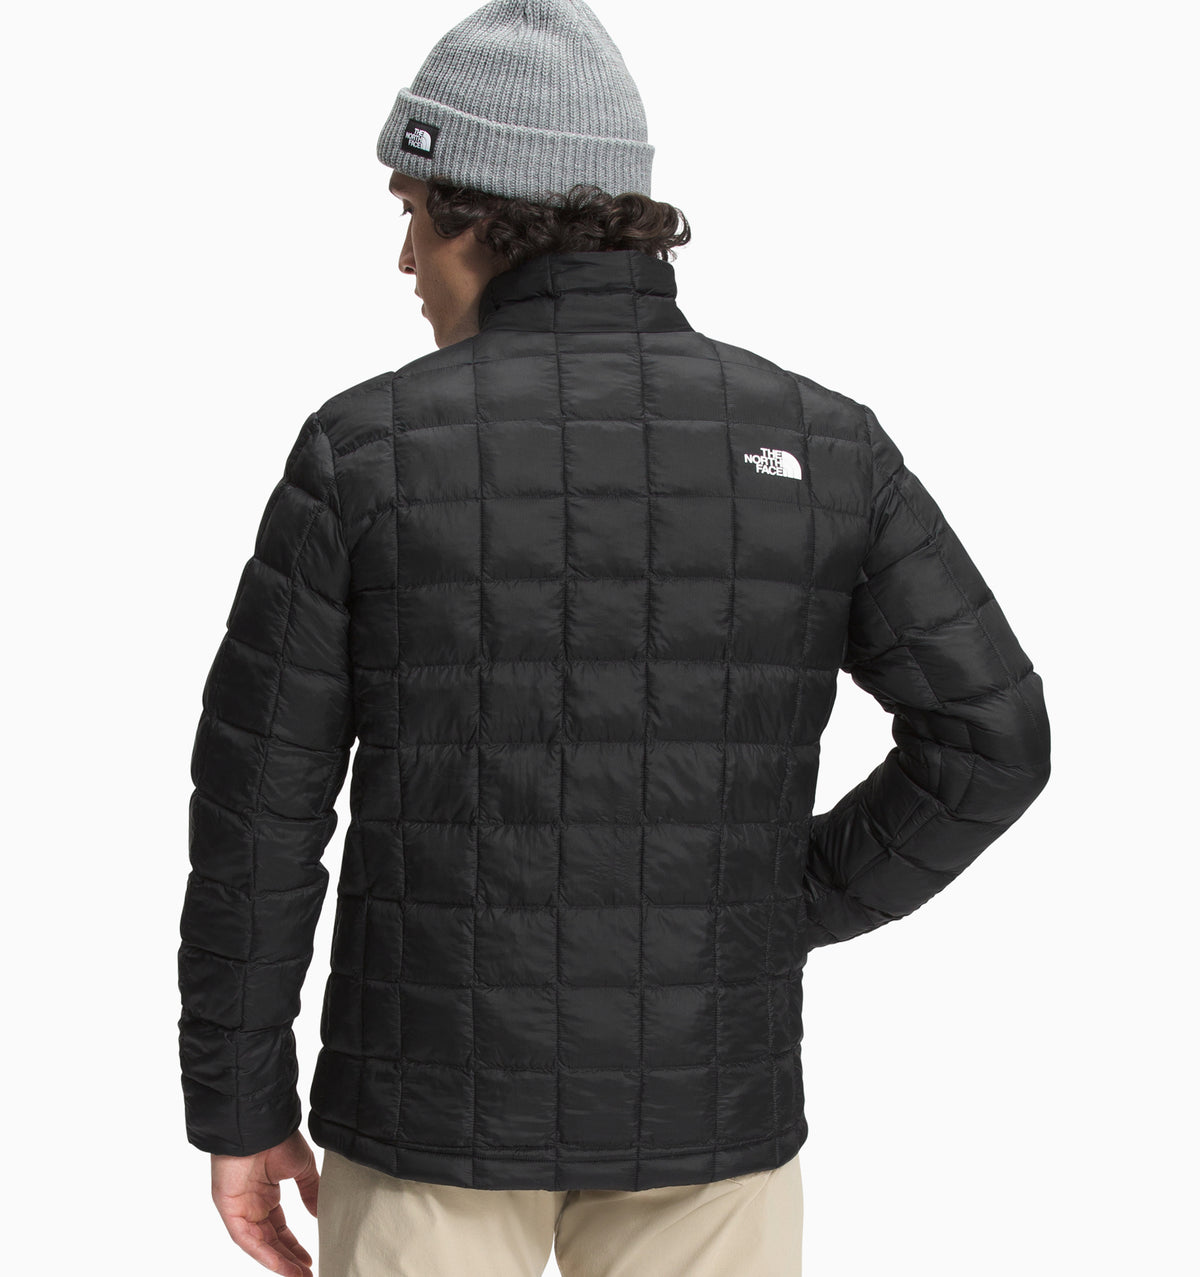 The North Face Men's ThermoBall Eco Jacket - Black